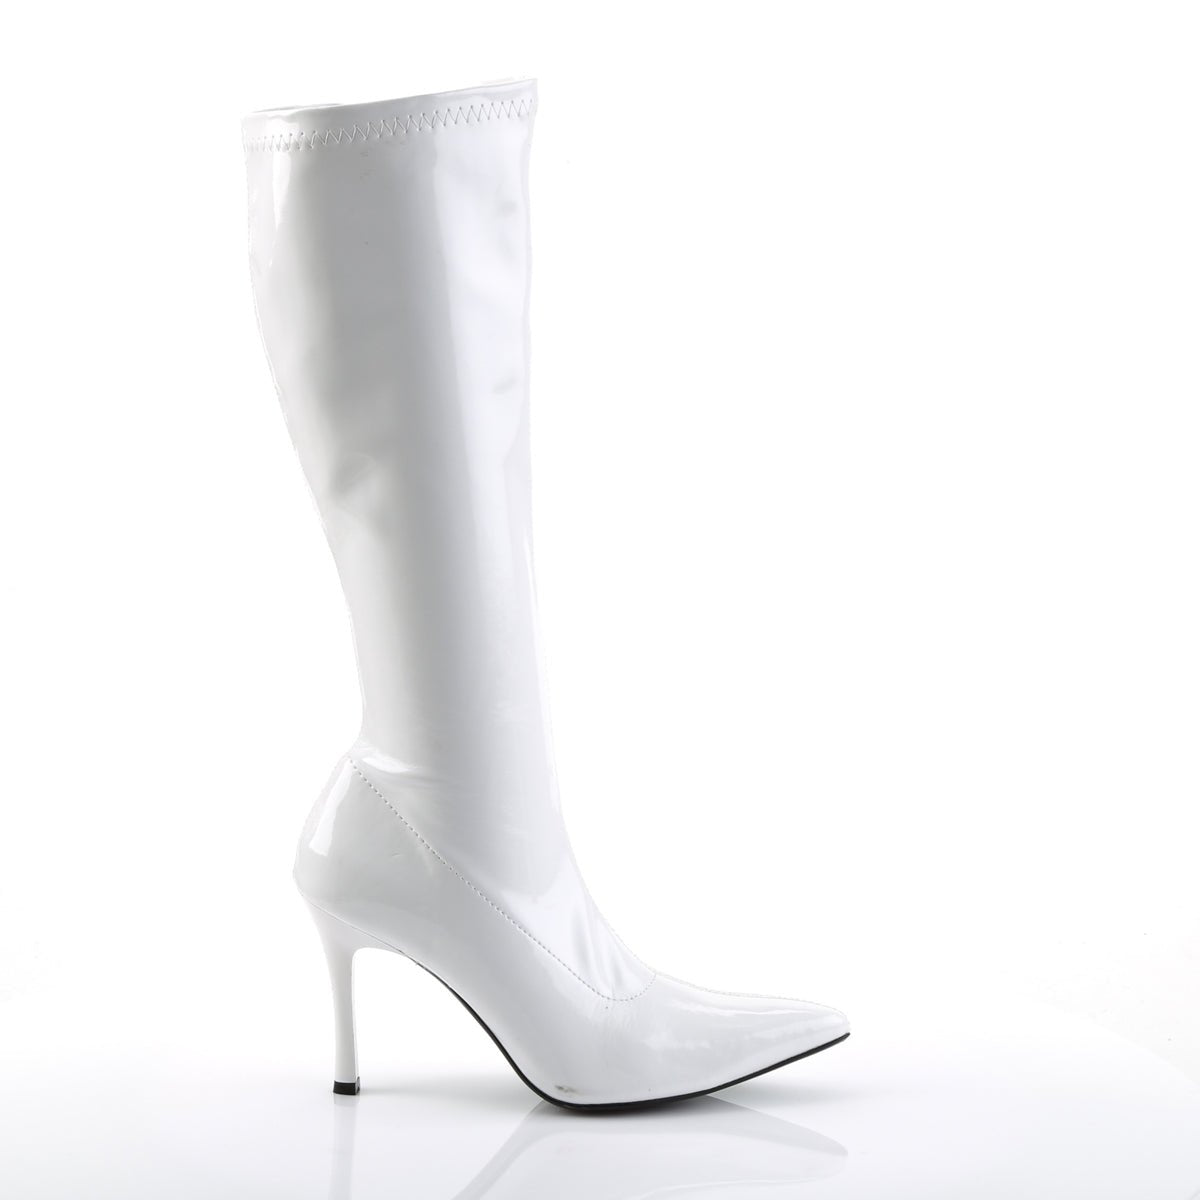 Clearance Funtasma Lust 2000 White Size 5UK/8USA - From Clearance Sold By Alternative Footwear